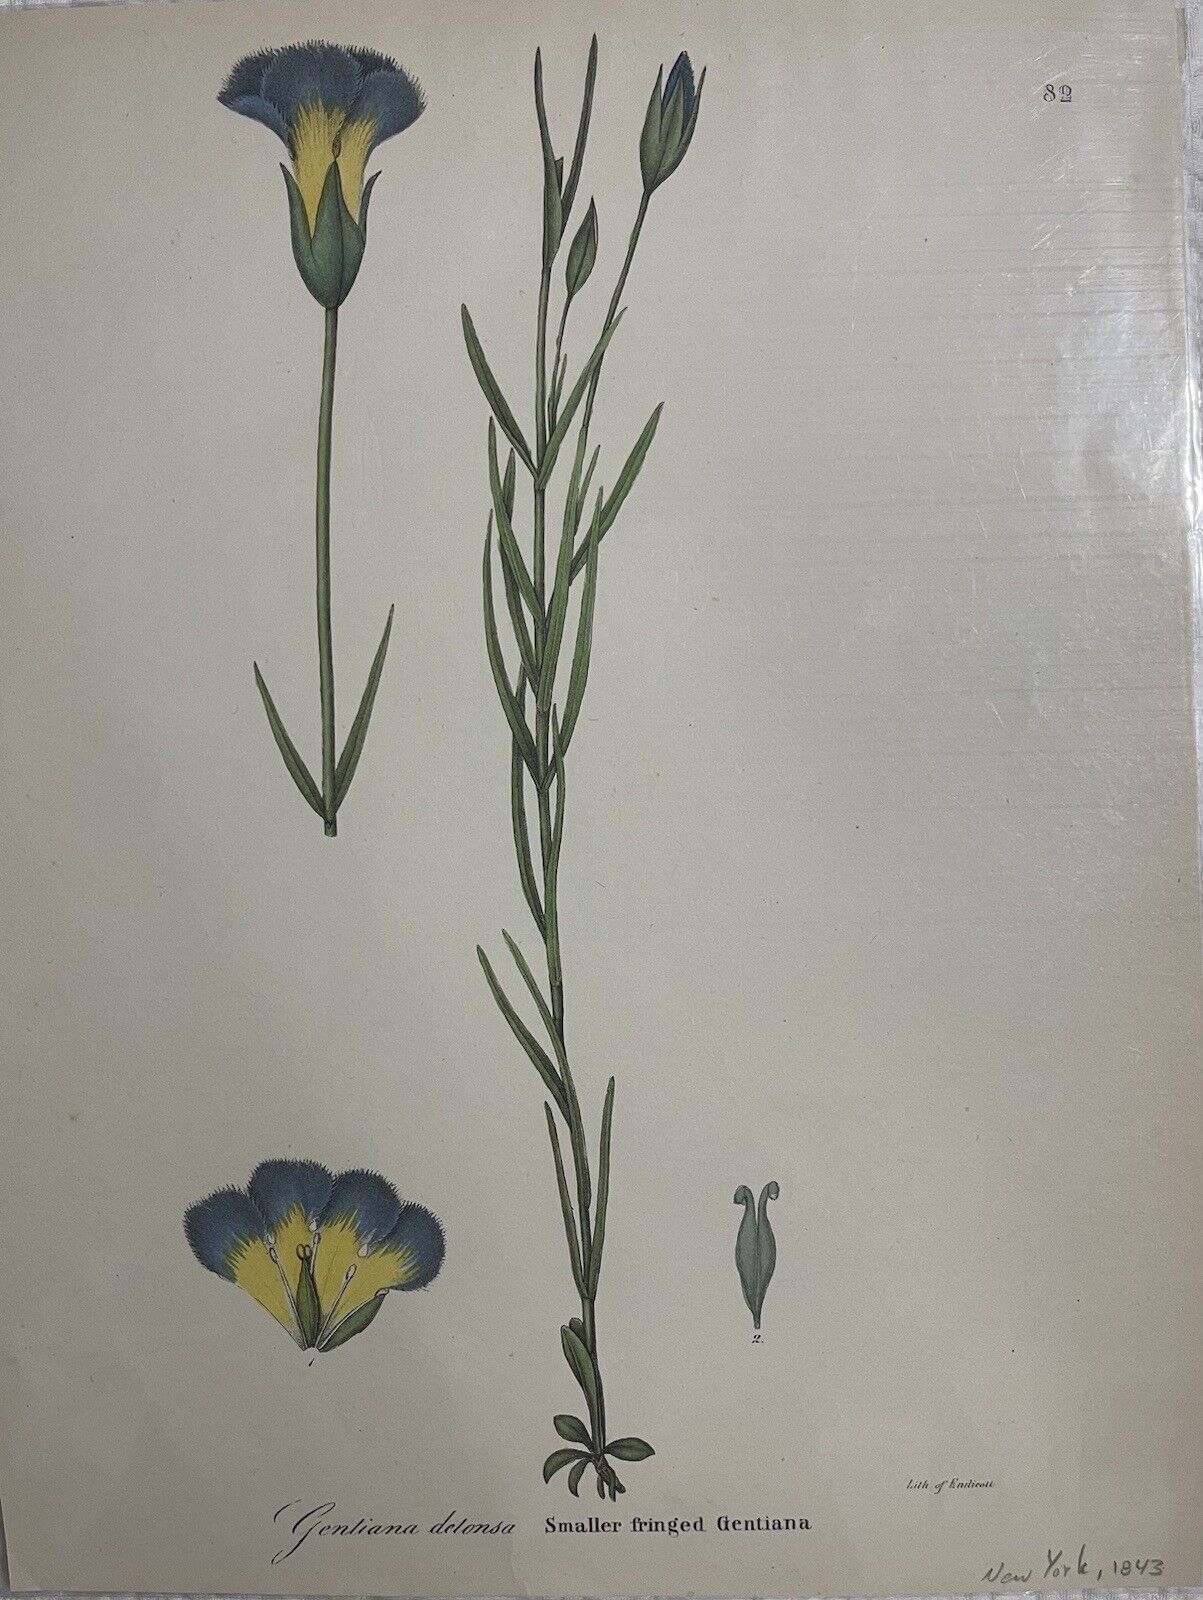 Set of 10 Hand Colored Lithographs of Plants from 1843 by Endicott of New York